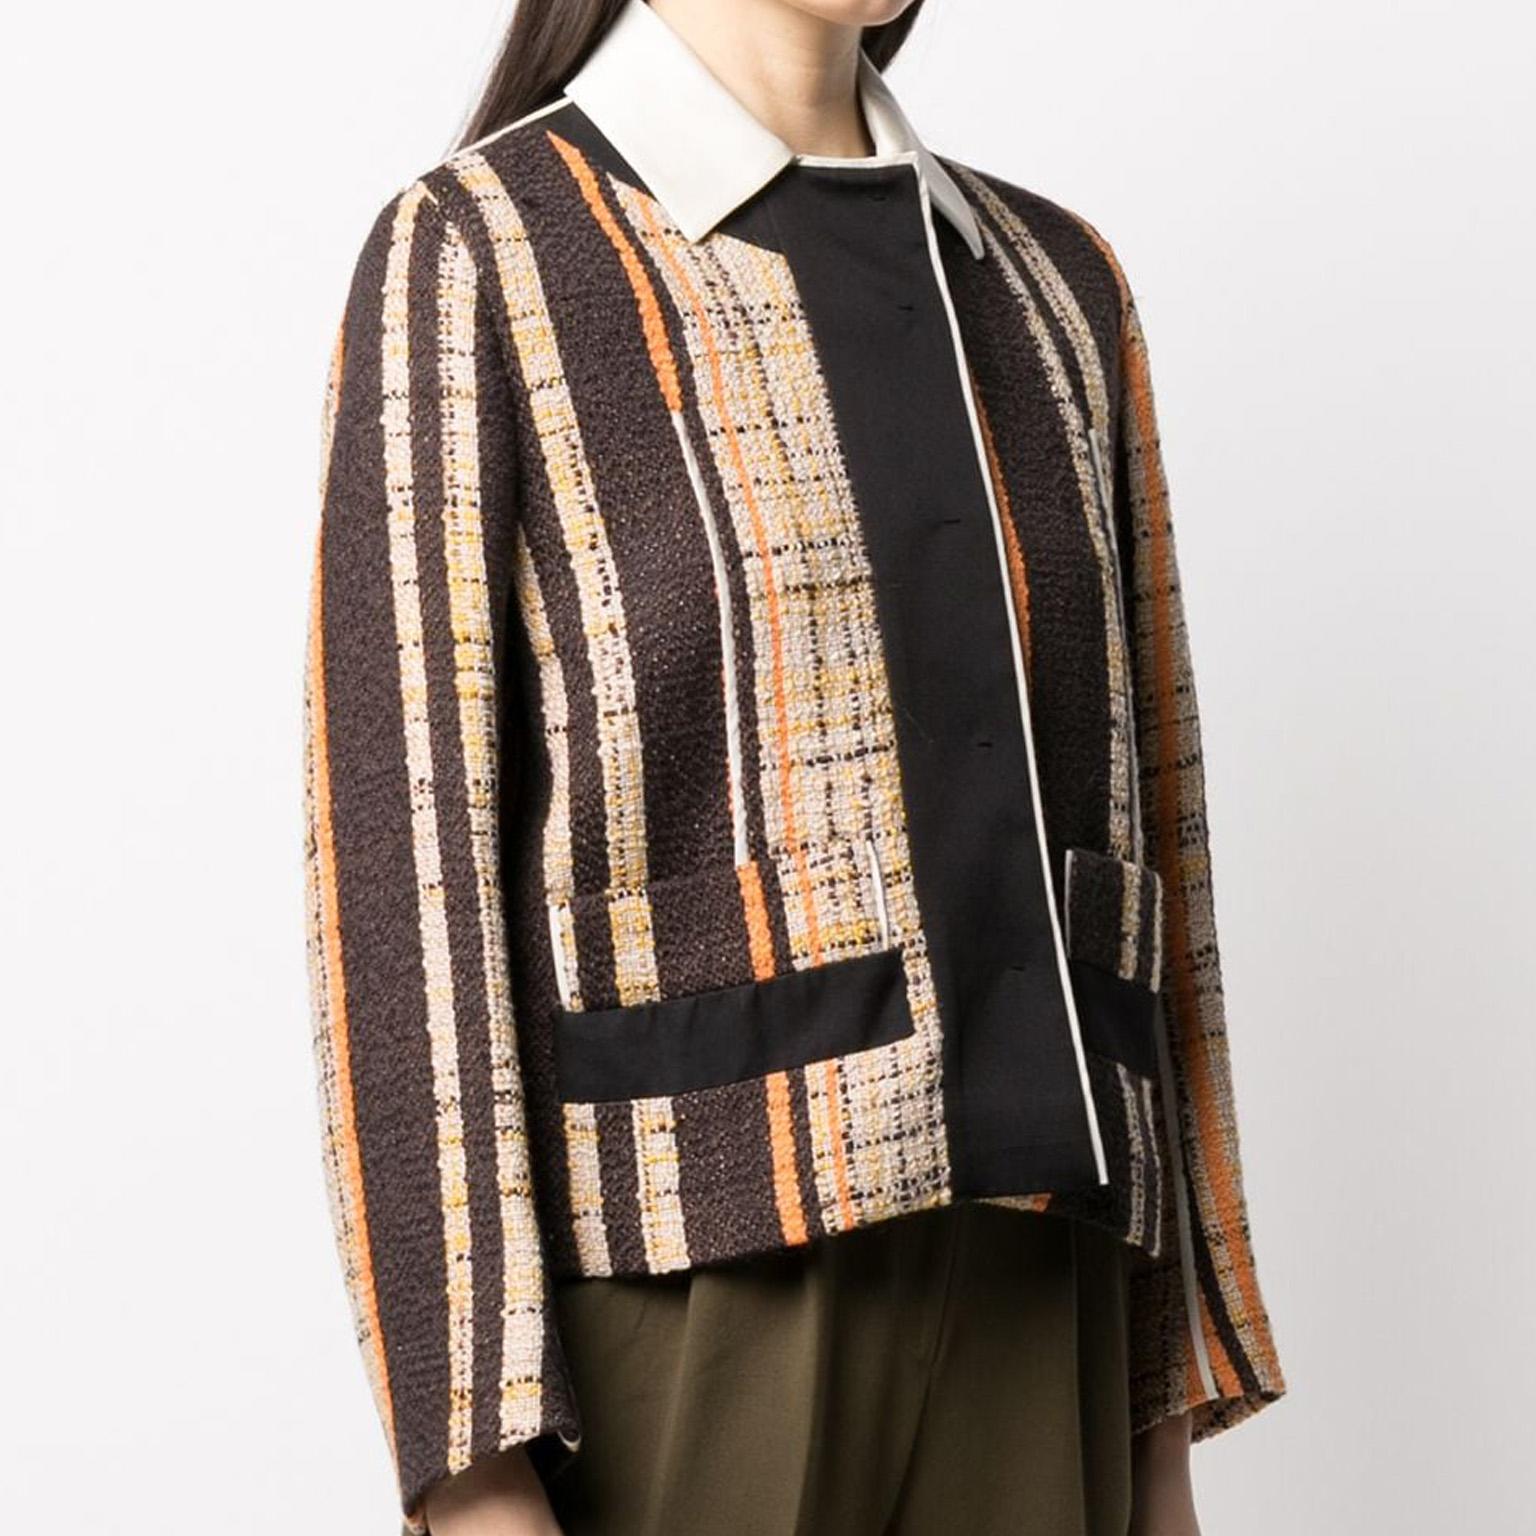 Beautifully structured blazer by Prada in earthy hues of orange, brown and cream. Featuring a contrasting white collar, concealed front fastening, and two front patch pockets. Crafted from wool, with an intriguing and unique interwoven design makes